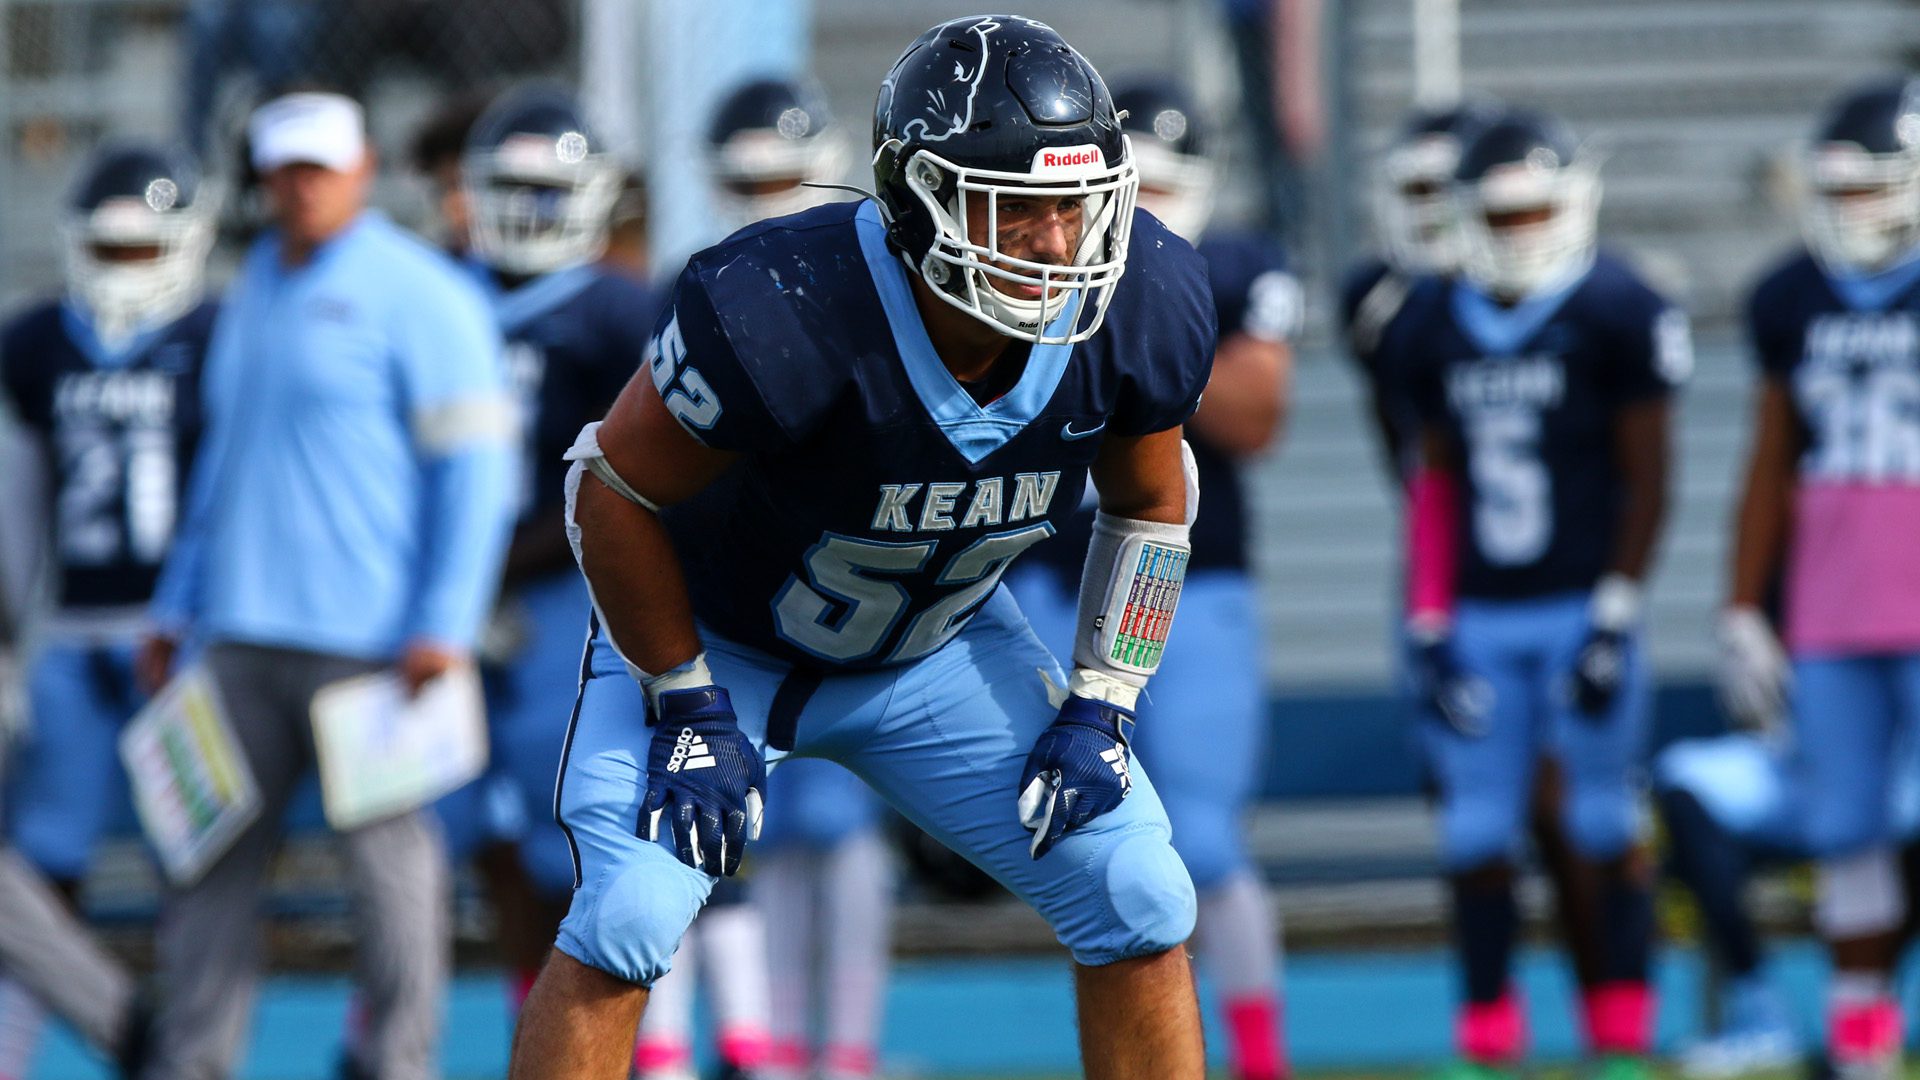 Dante Capozzoli is an All-American and the leader of Kean University's defense at LB. He recently sat down with NFL Draft Diamonds writer Jimmy Williams.